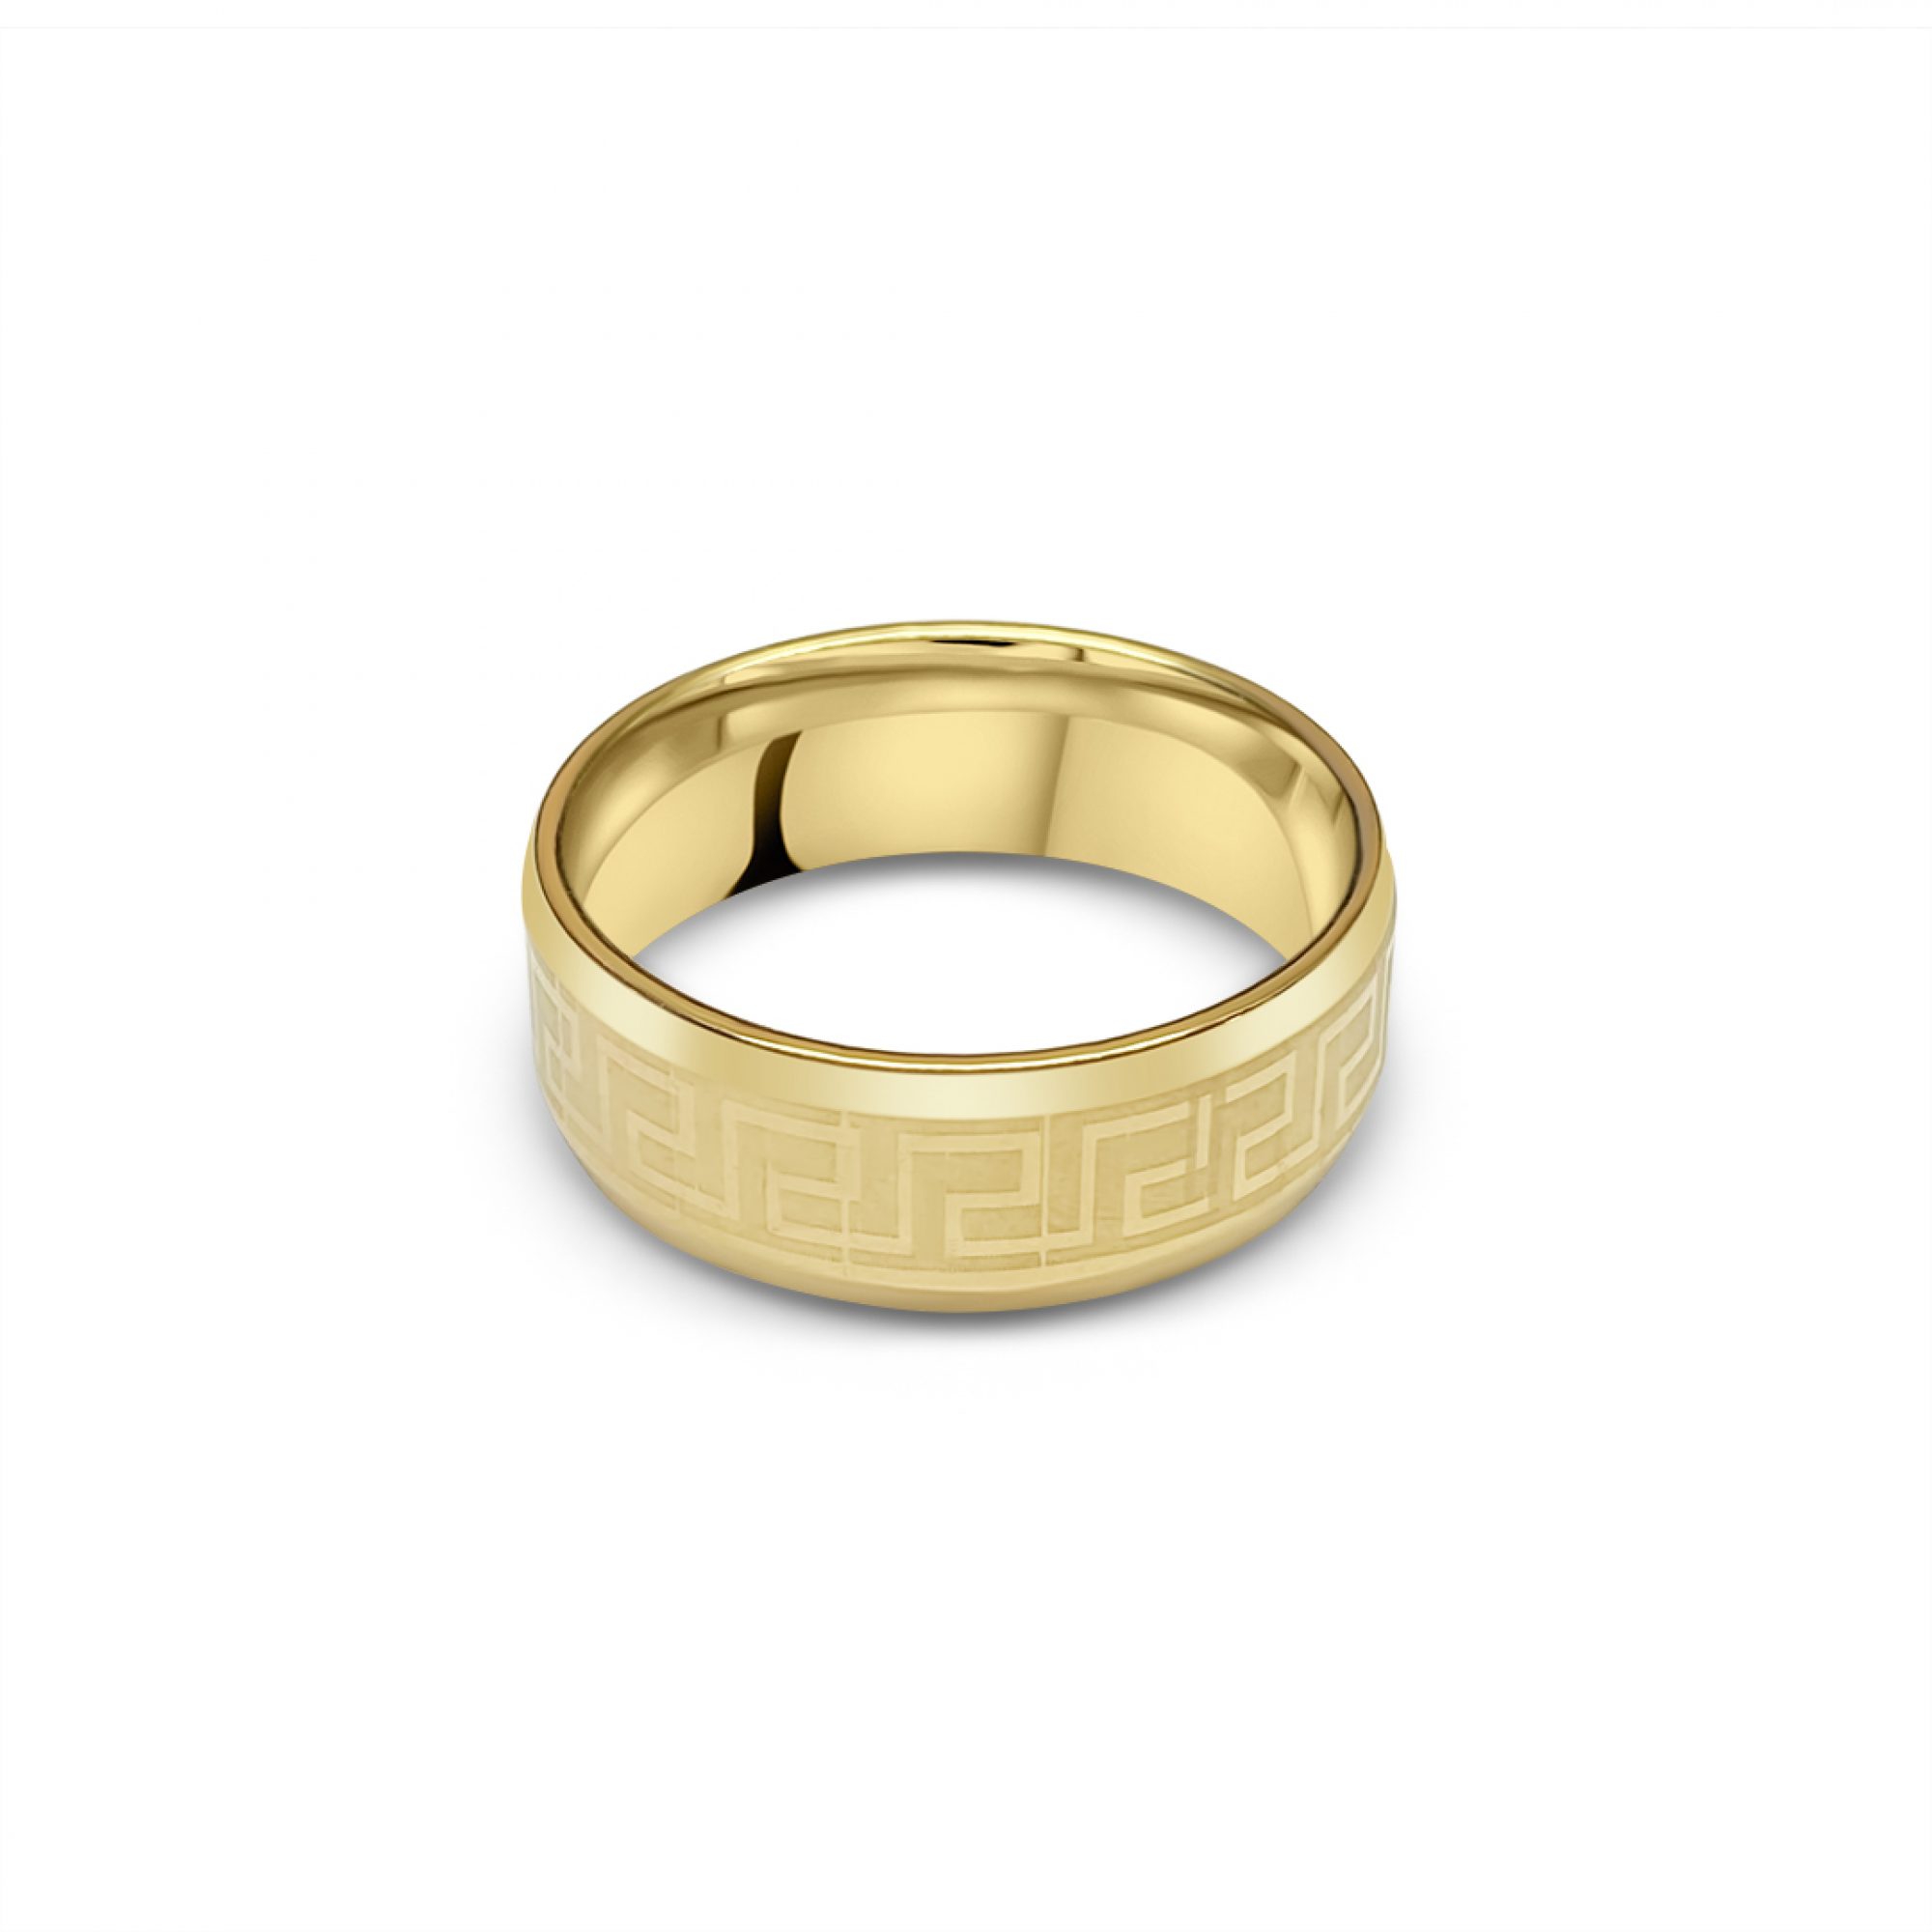 Gold plated steel ring with meander